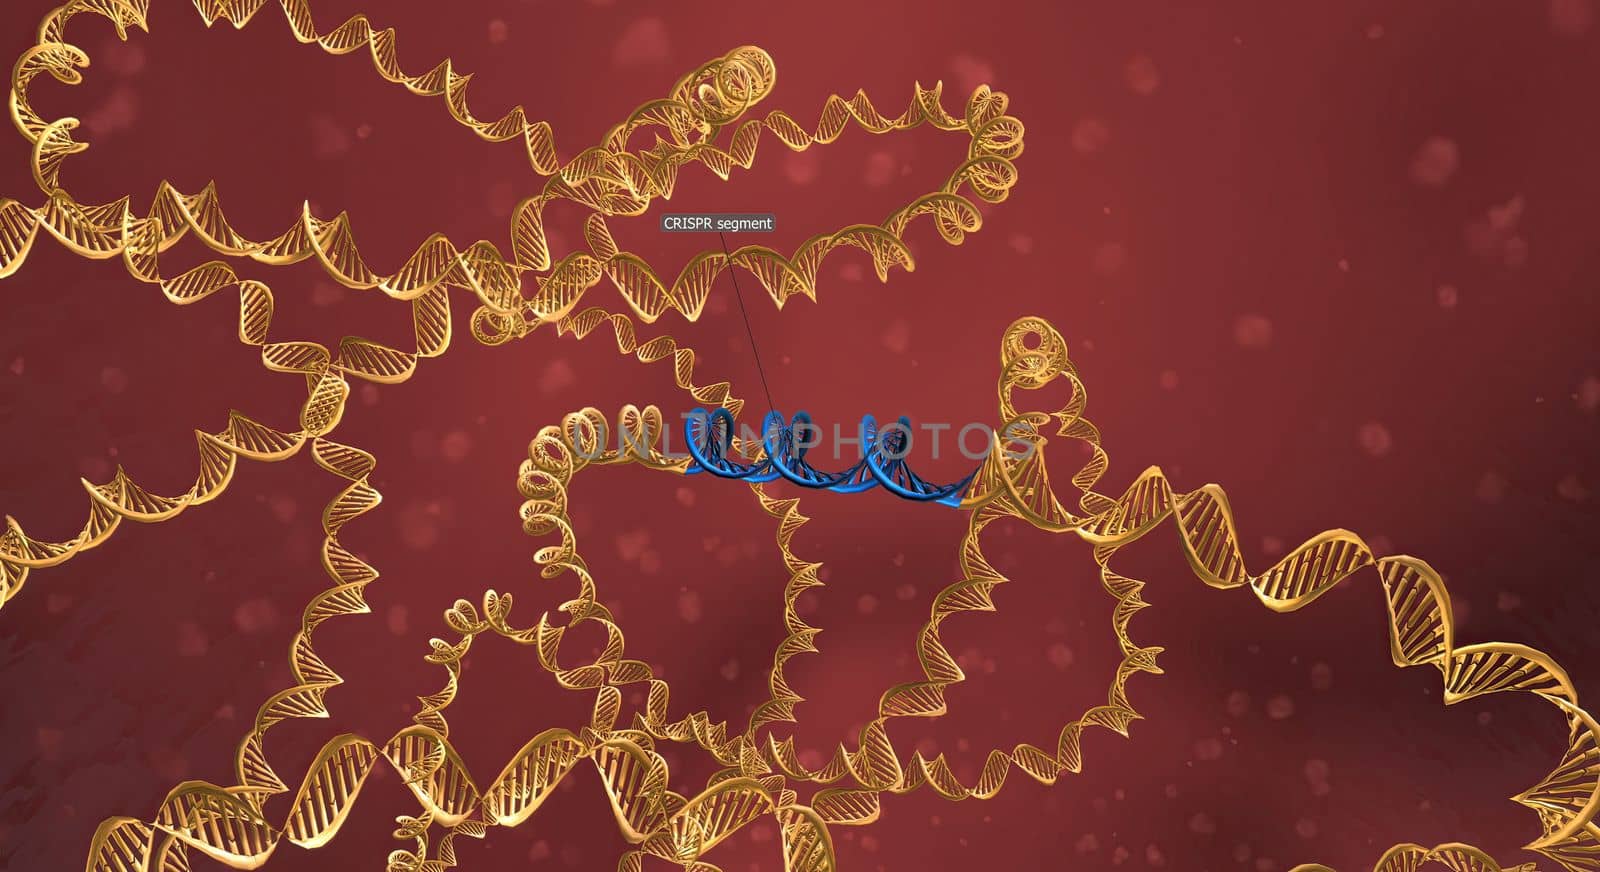 The long RNA backbone binds to the DNA, and the predesigned sequence guides Cas9 to the right spot in the genome. 3D illustration by creativepic